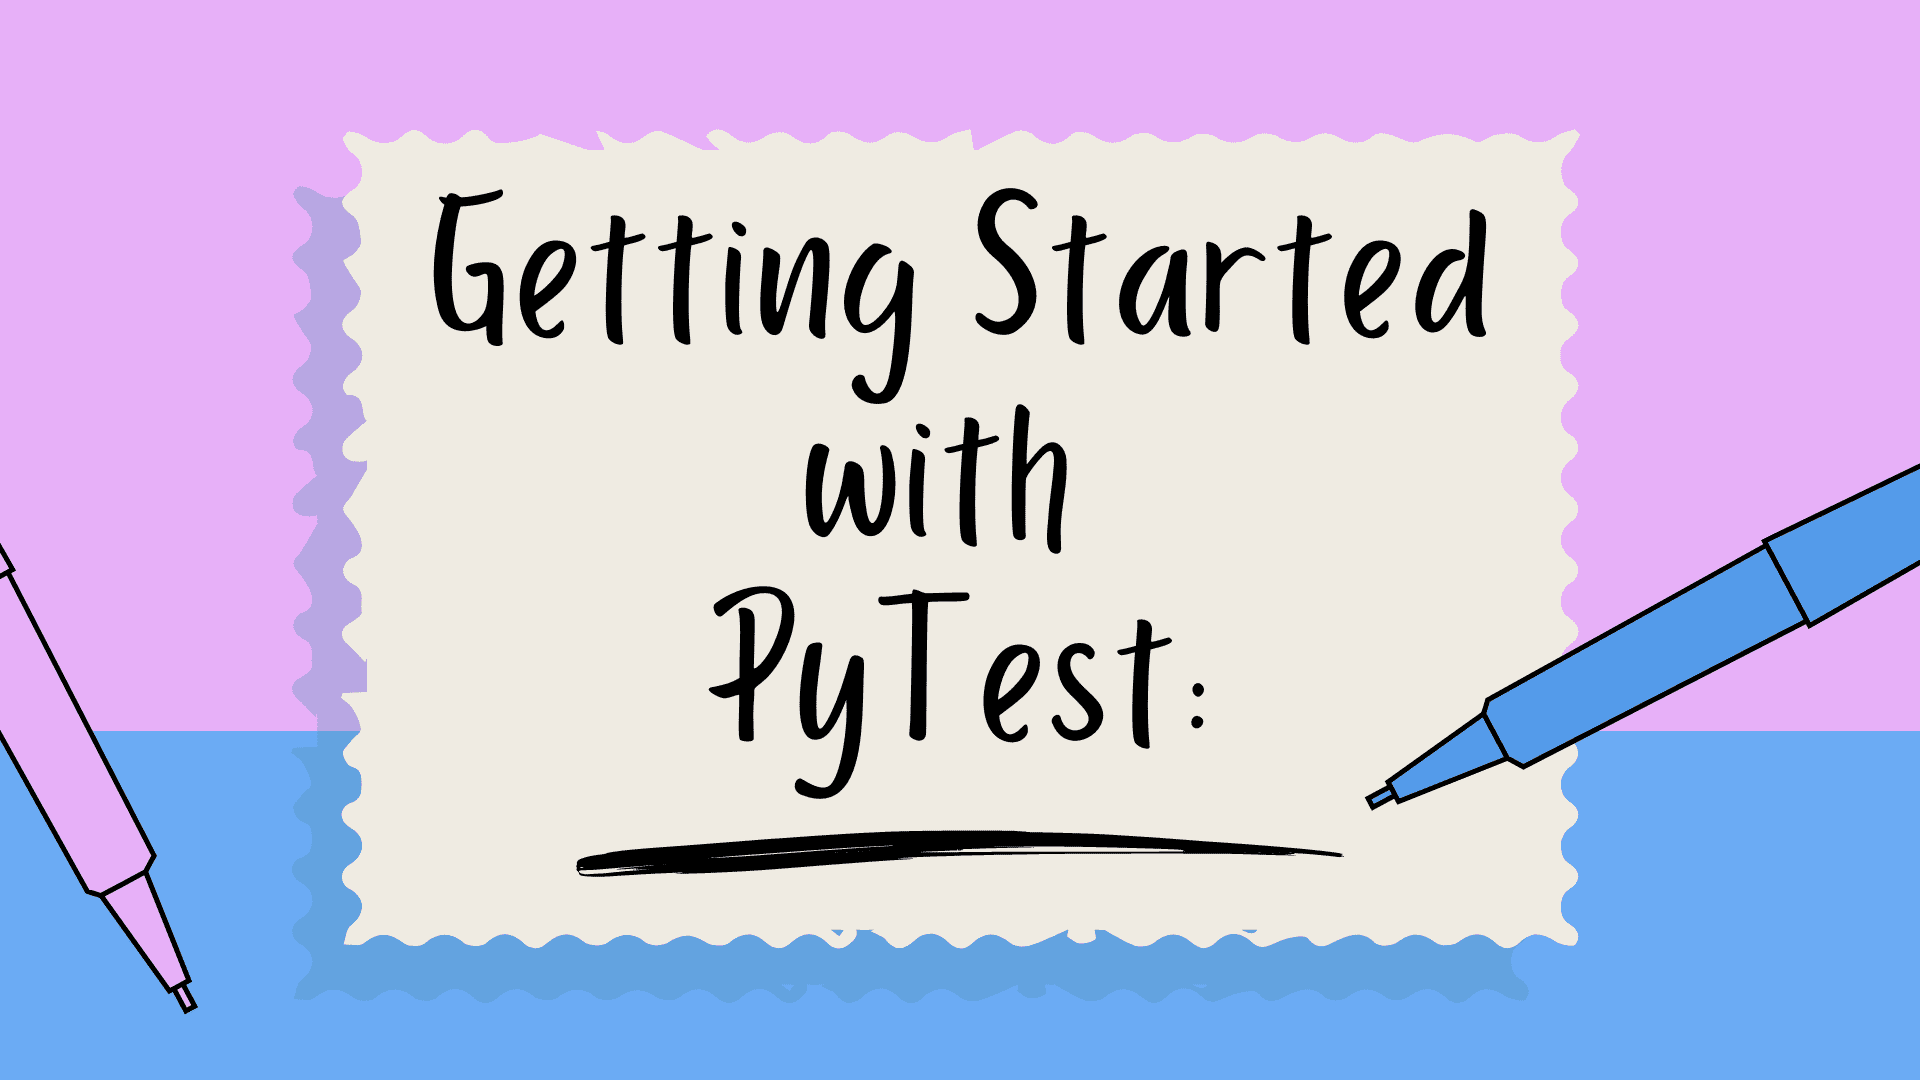 Getting Started with PyTest